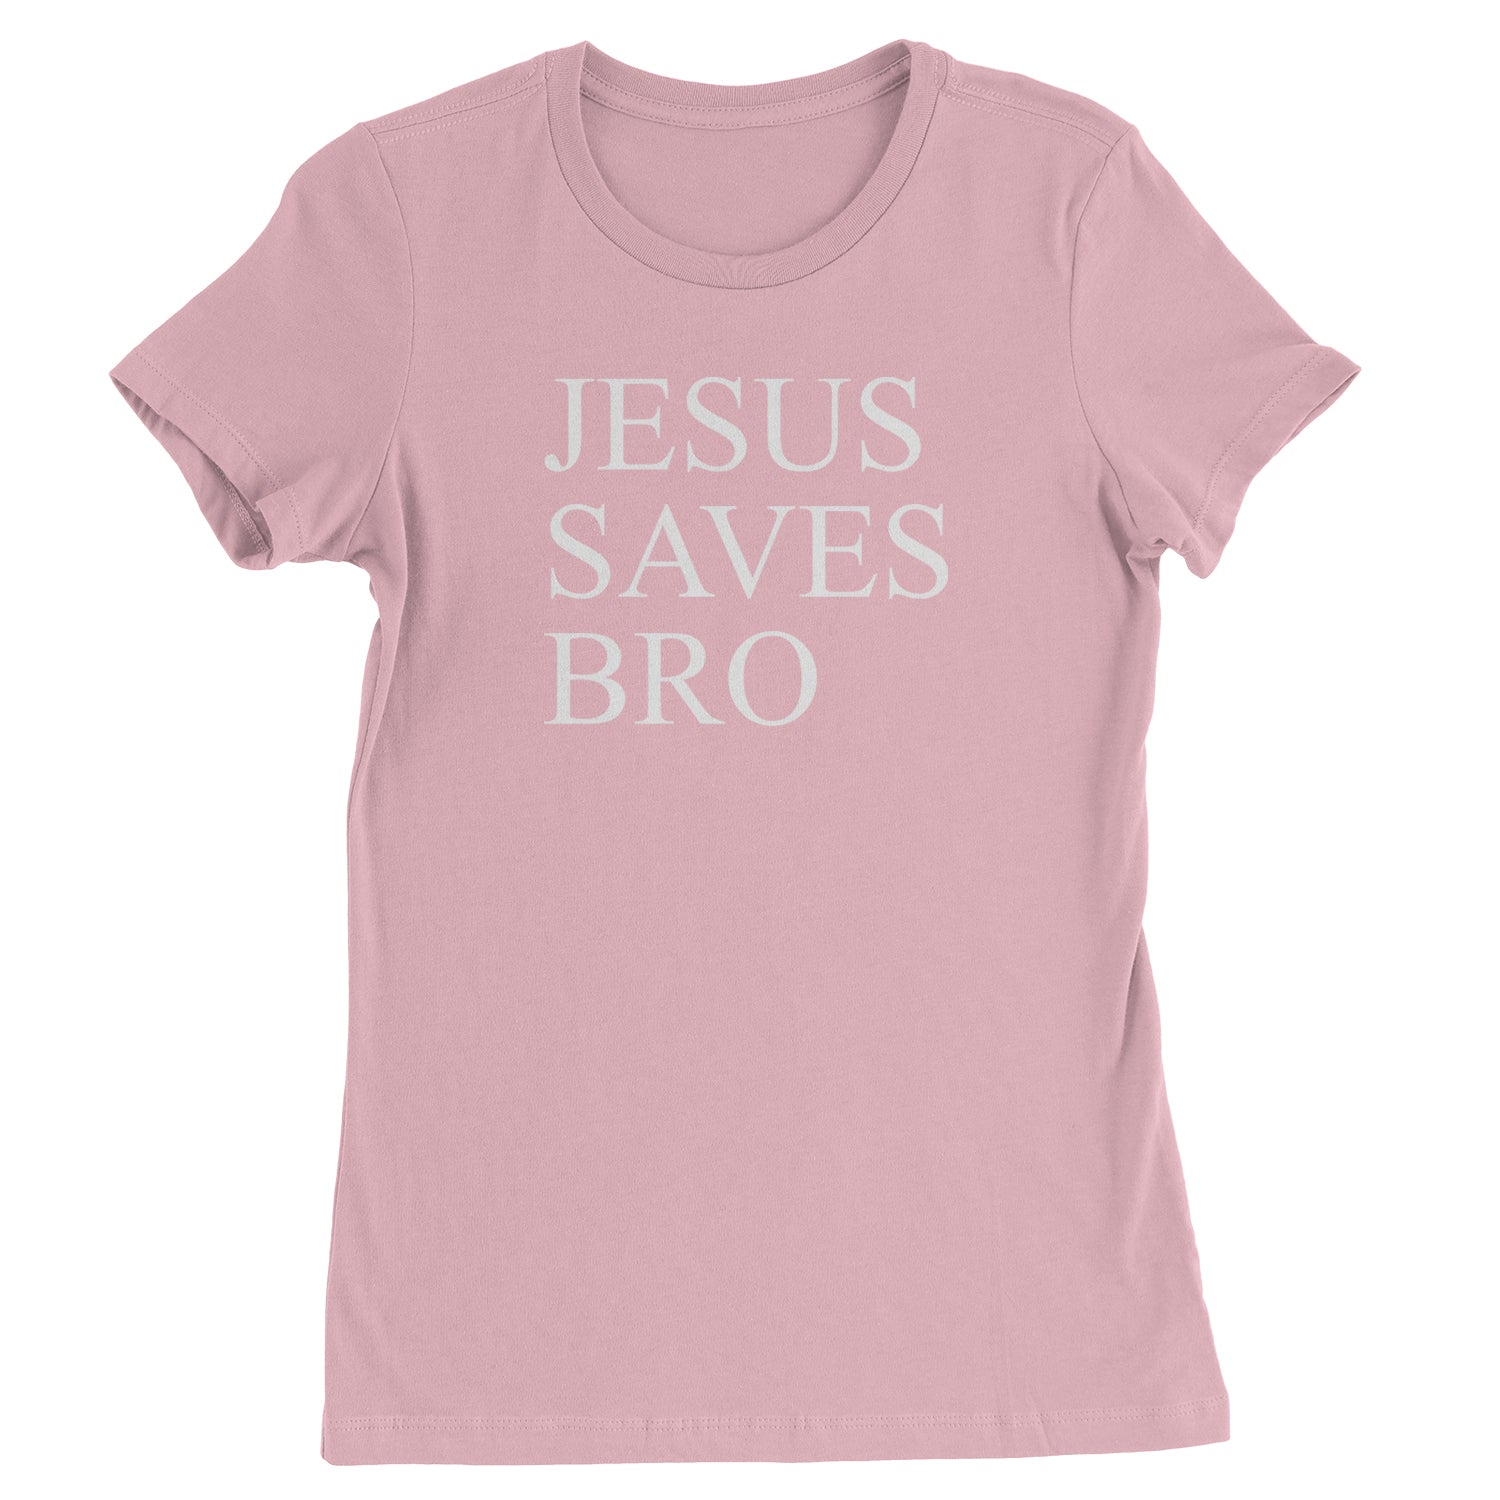 Jesus Saves Bro Womens T-shirt catholic, christian, christianity, church, jesus, religion, religuous by Expression Tees